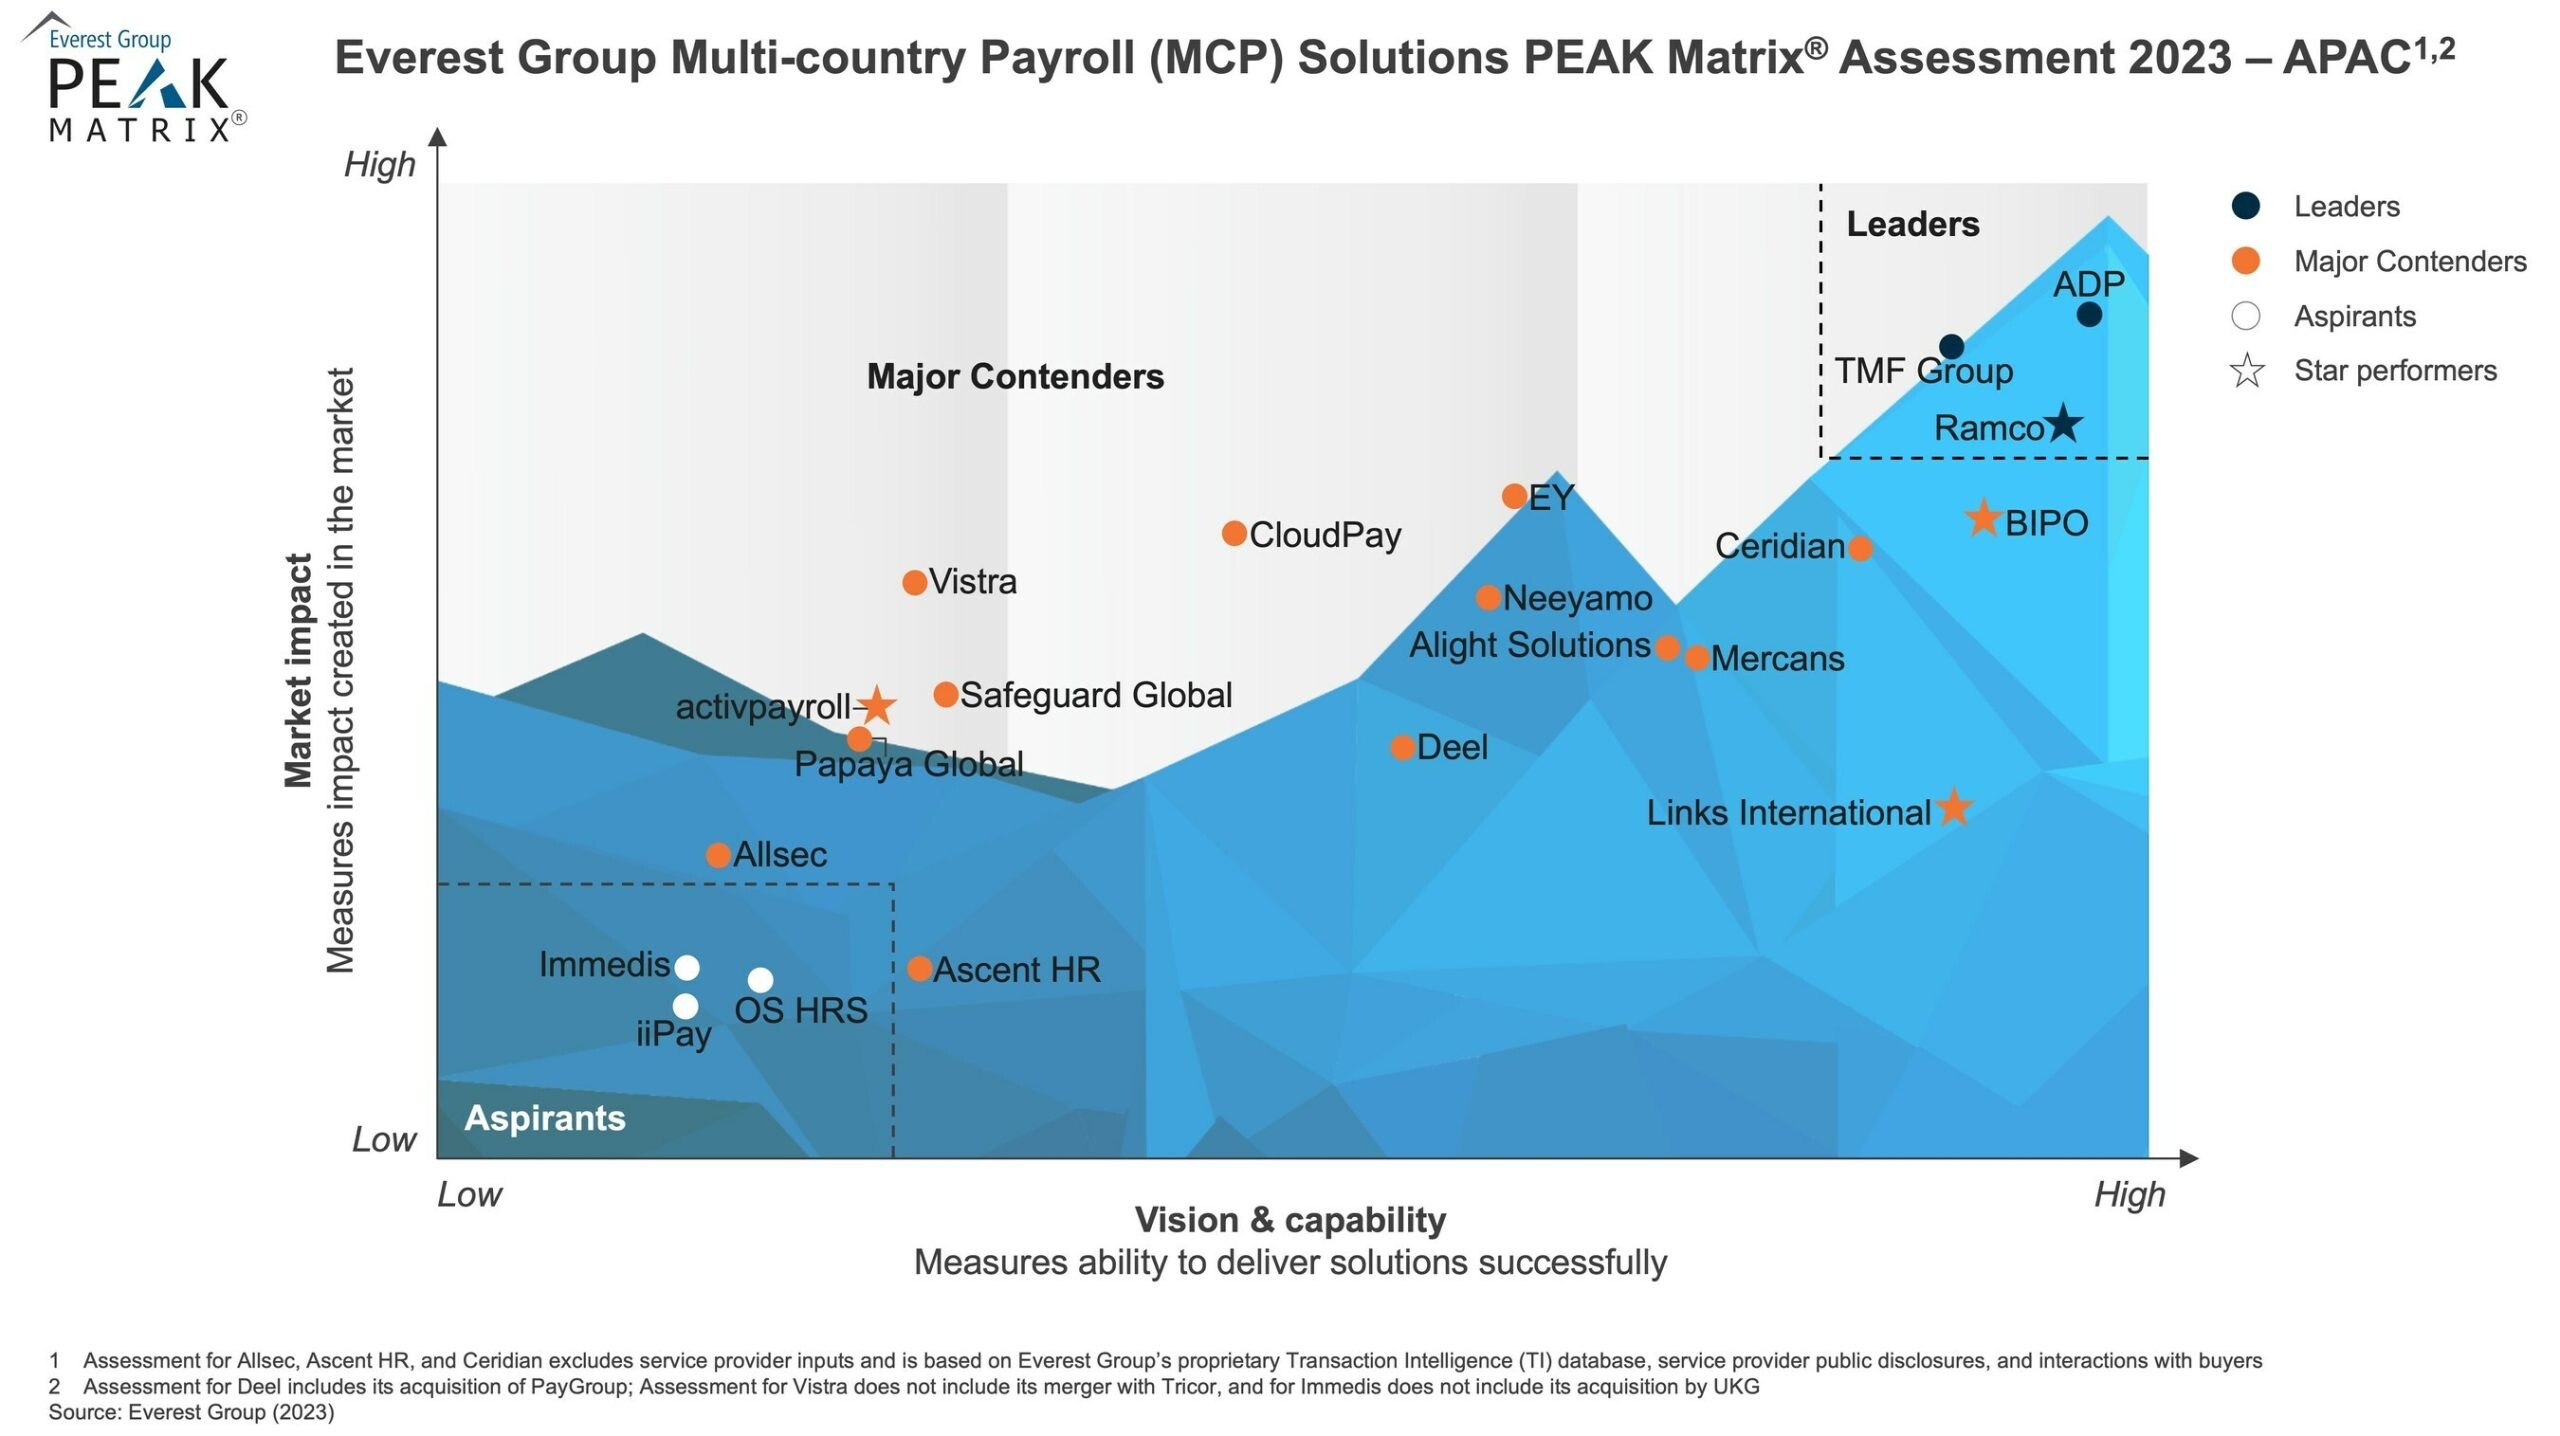 BIPO Recognised as Major Contender and a Star Performer in Everest Group’s APAC Multi-country Payroll Solutions PEAK Matrix(R) Assessment 2023